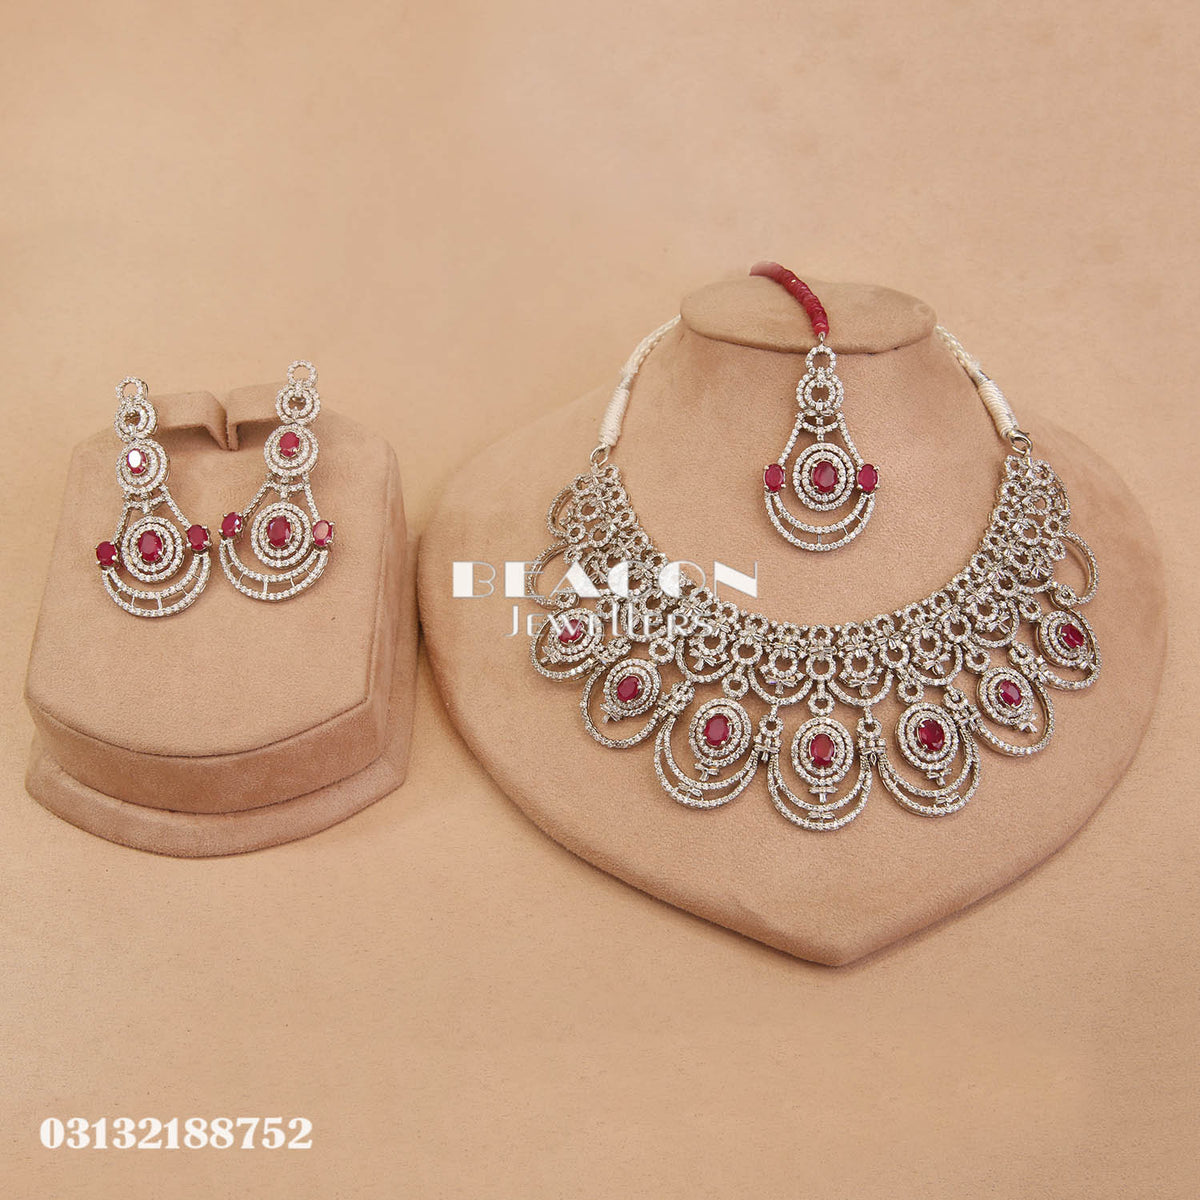 Necklace with Bindi and Earrings 69